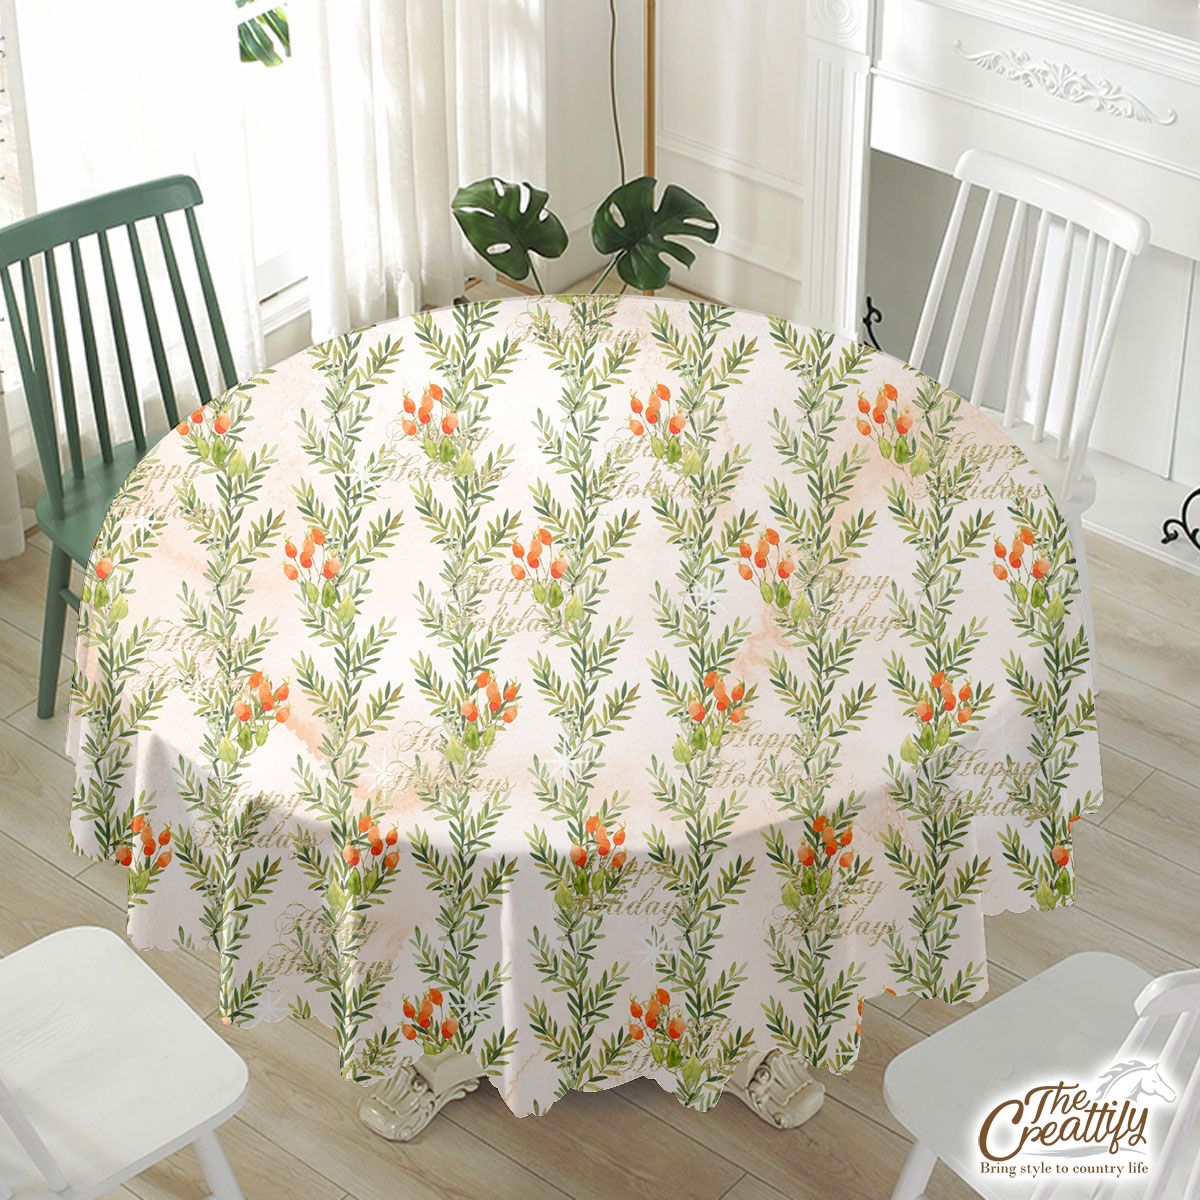 Happy Holidays With Christmas Mistletoe Waterproof Tablecloth